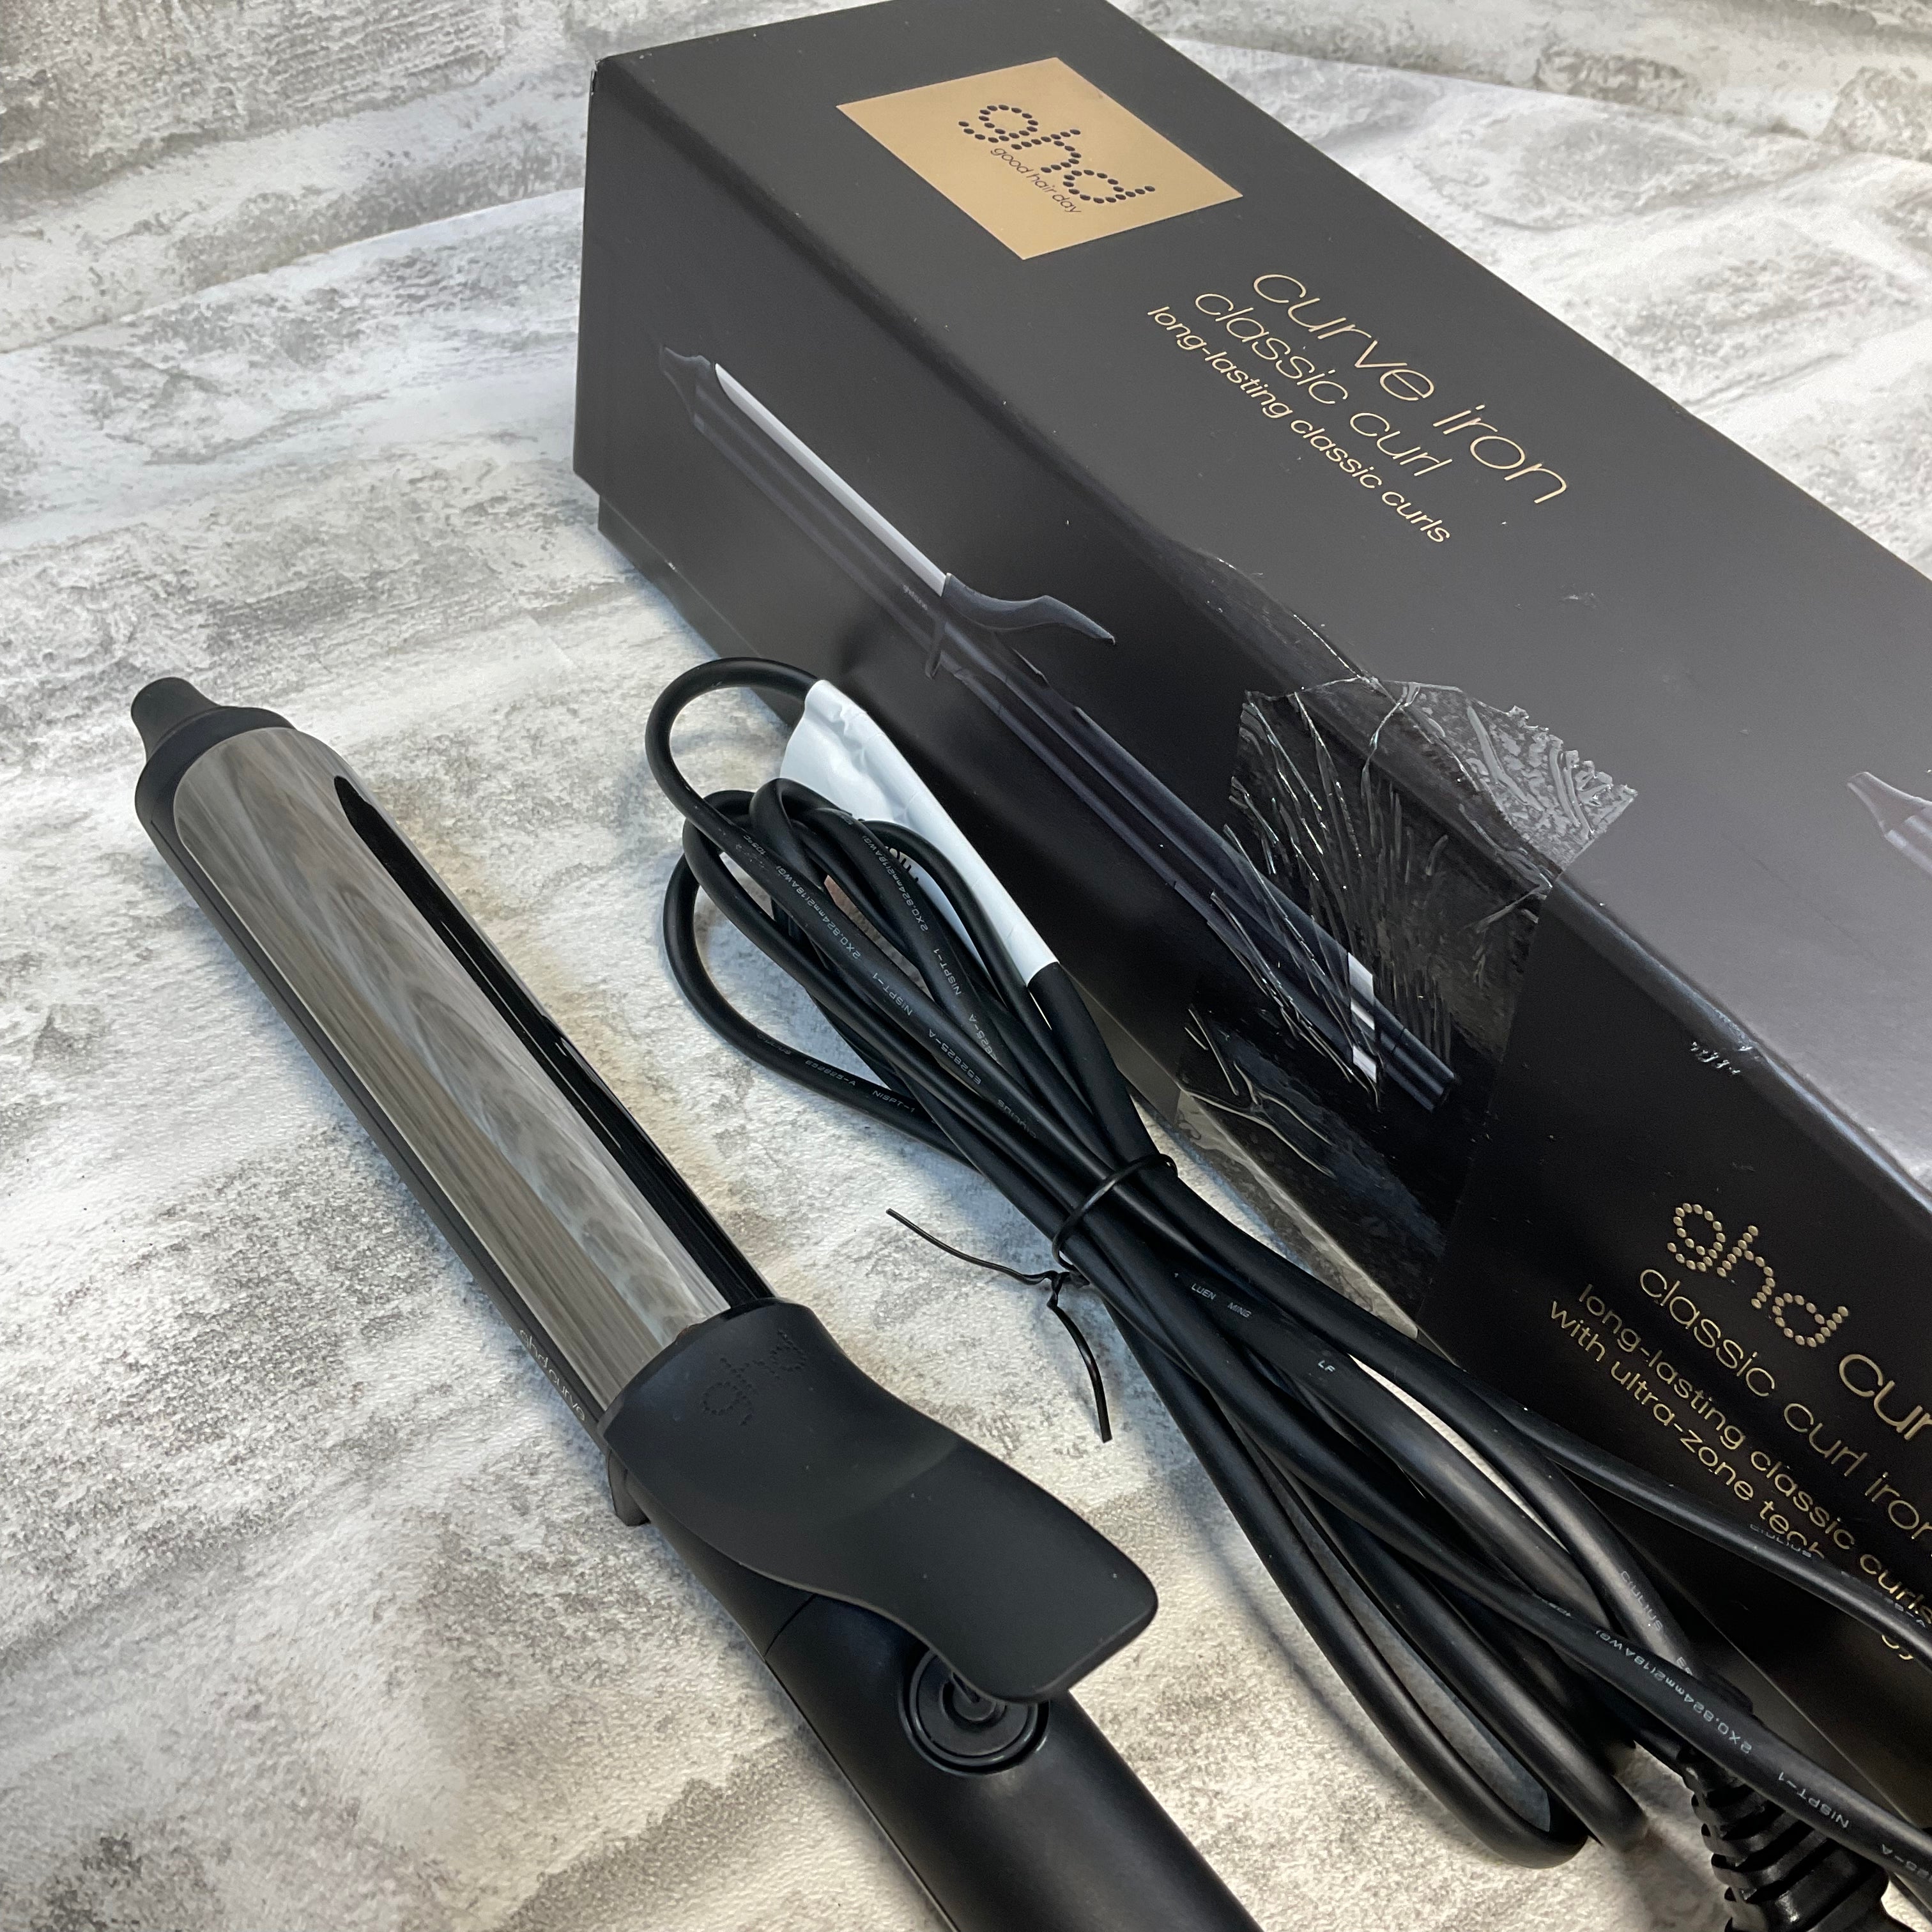 ghd Curling Irons and Wands - Professional Curlers & Curling Hair Tools (7515512144110)